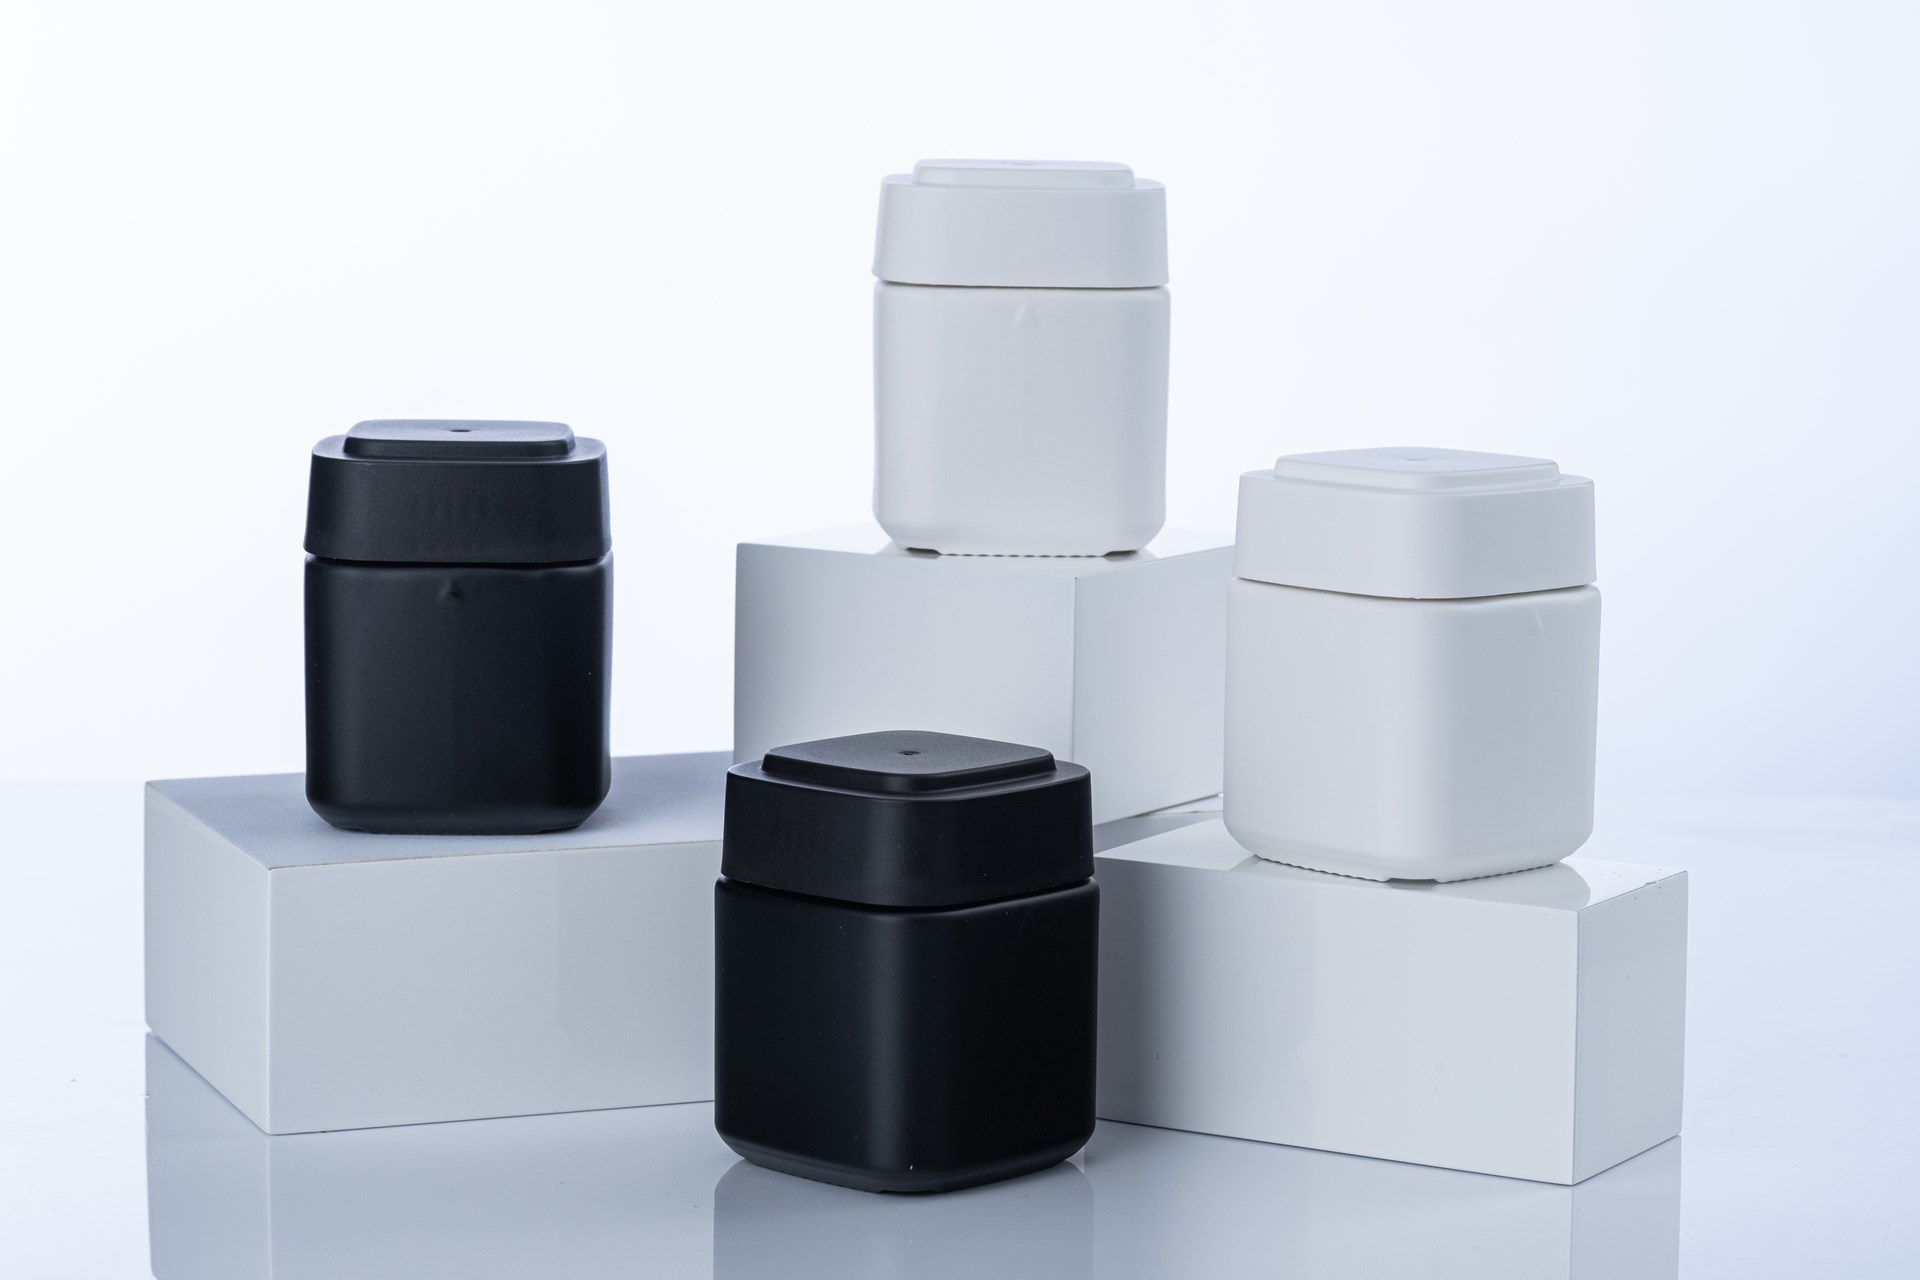 Calyx’s black and white cannabis containers